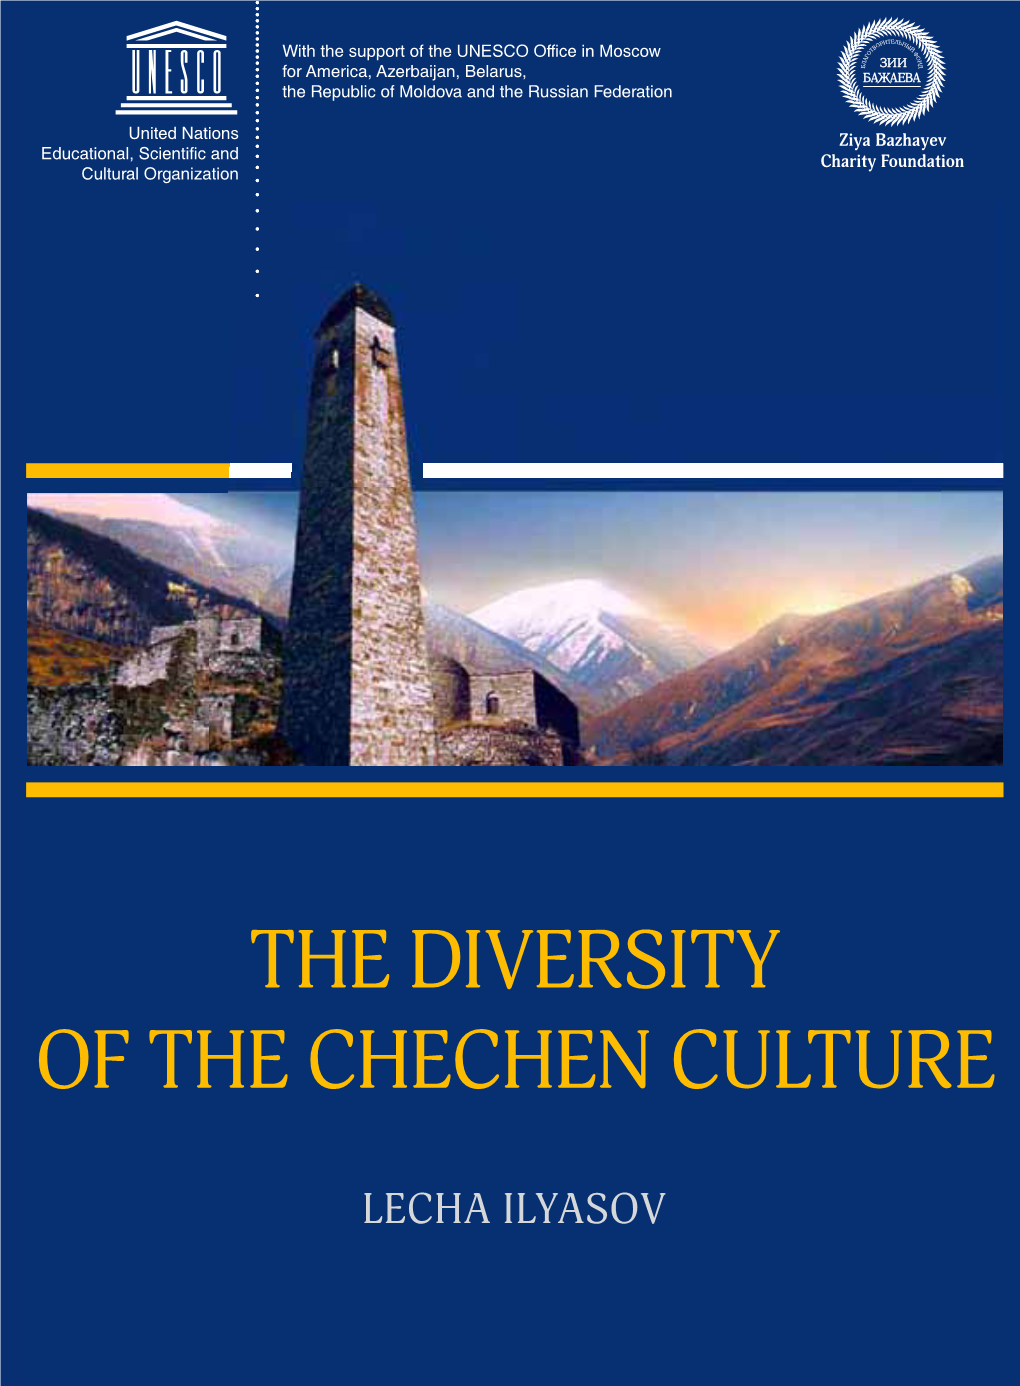 The Diversity of the Chechen Culture